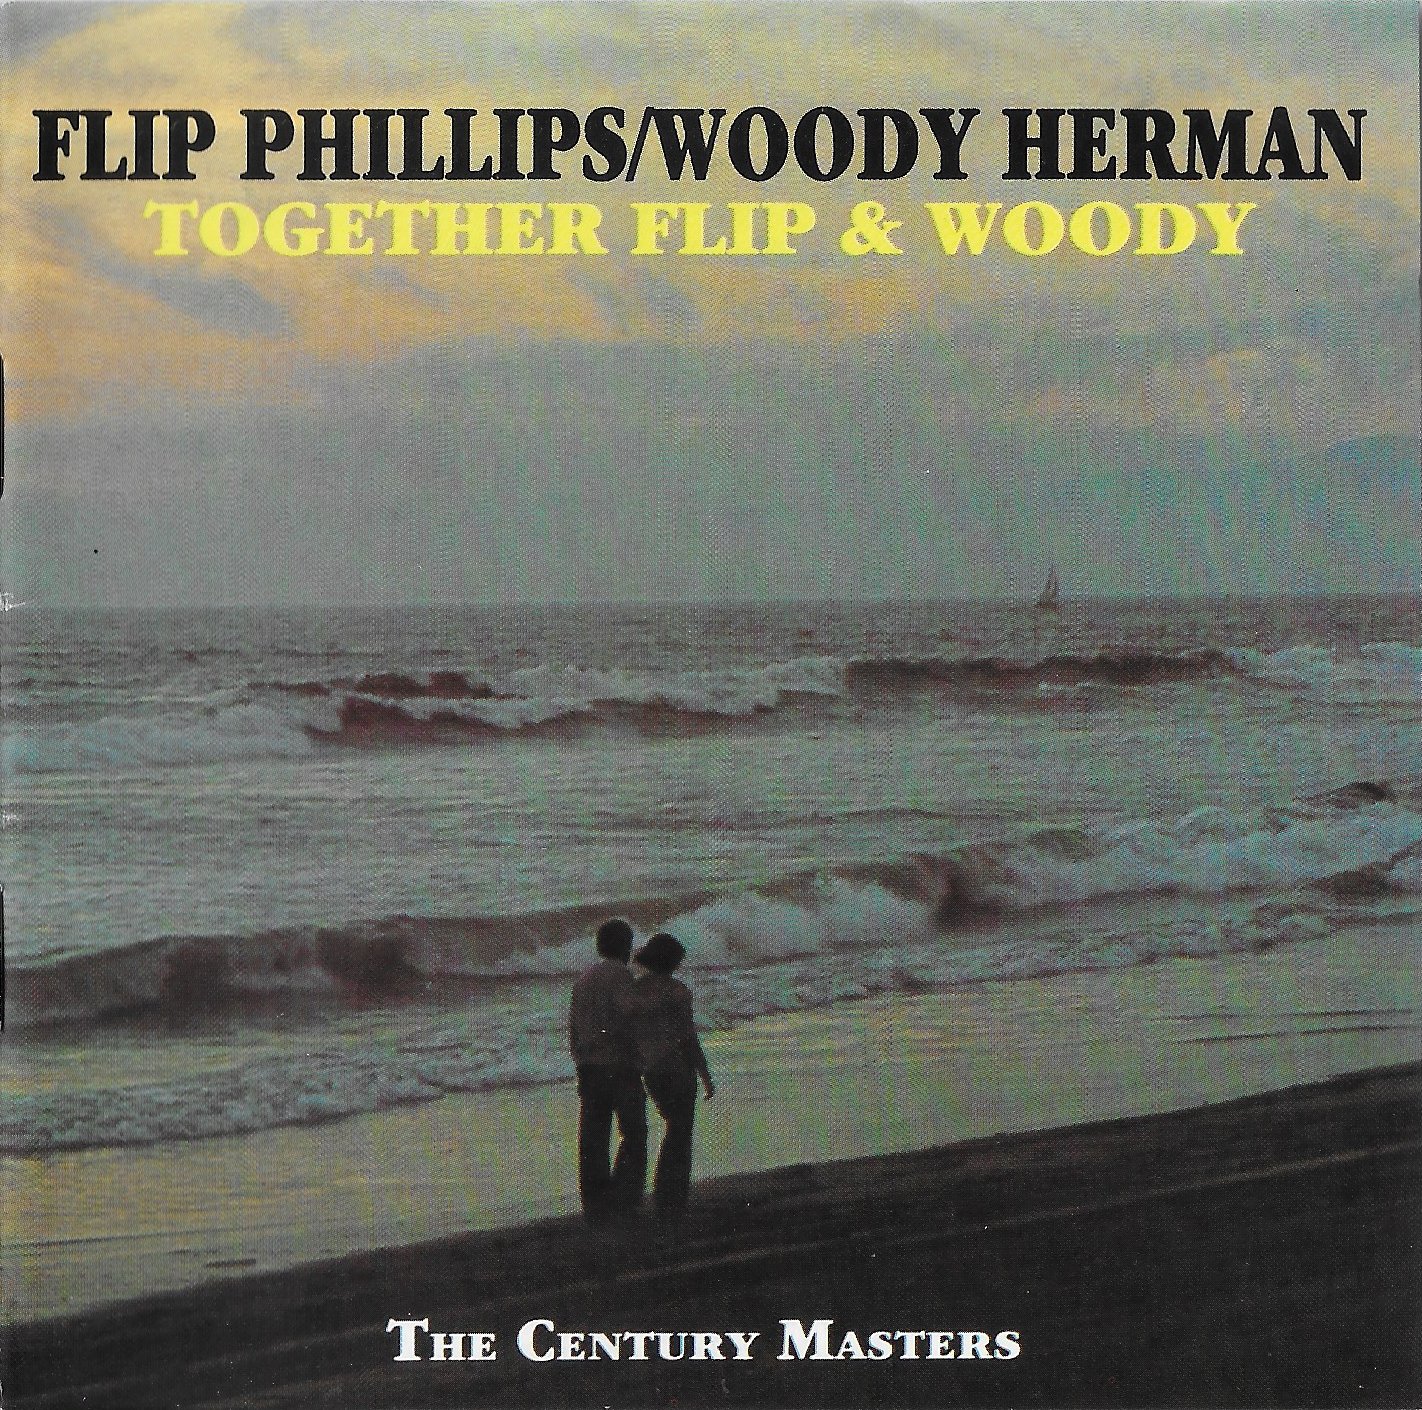 Picture of The Century Catalogue - Together Flip & Woody by artist Flip Phillips / Woody Herman from the BBC cds - Records and Tapes library